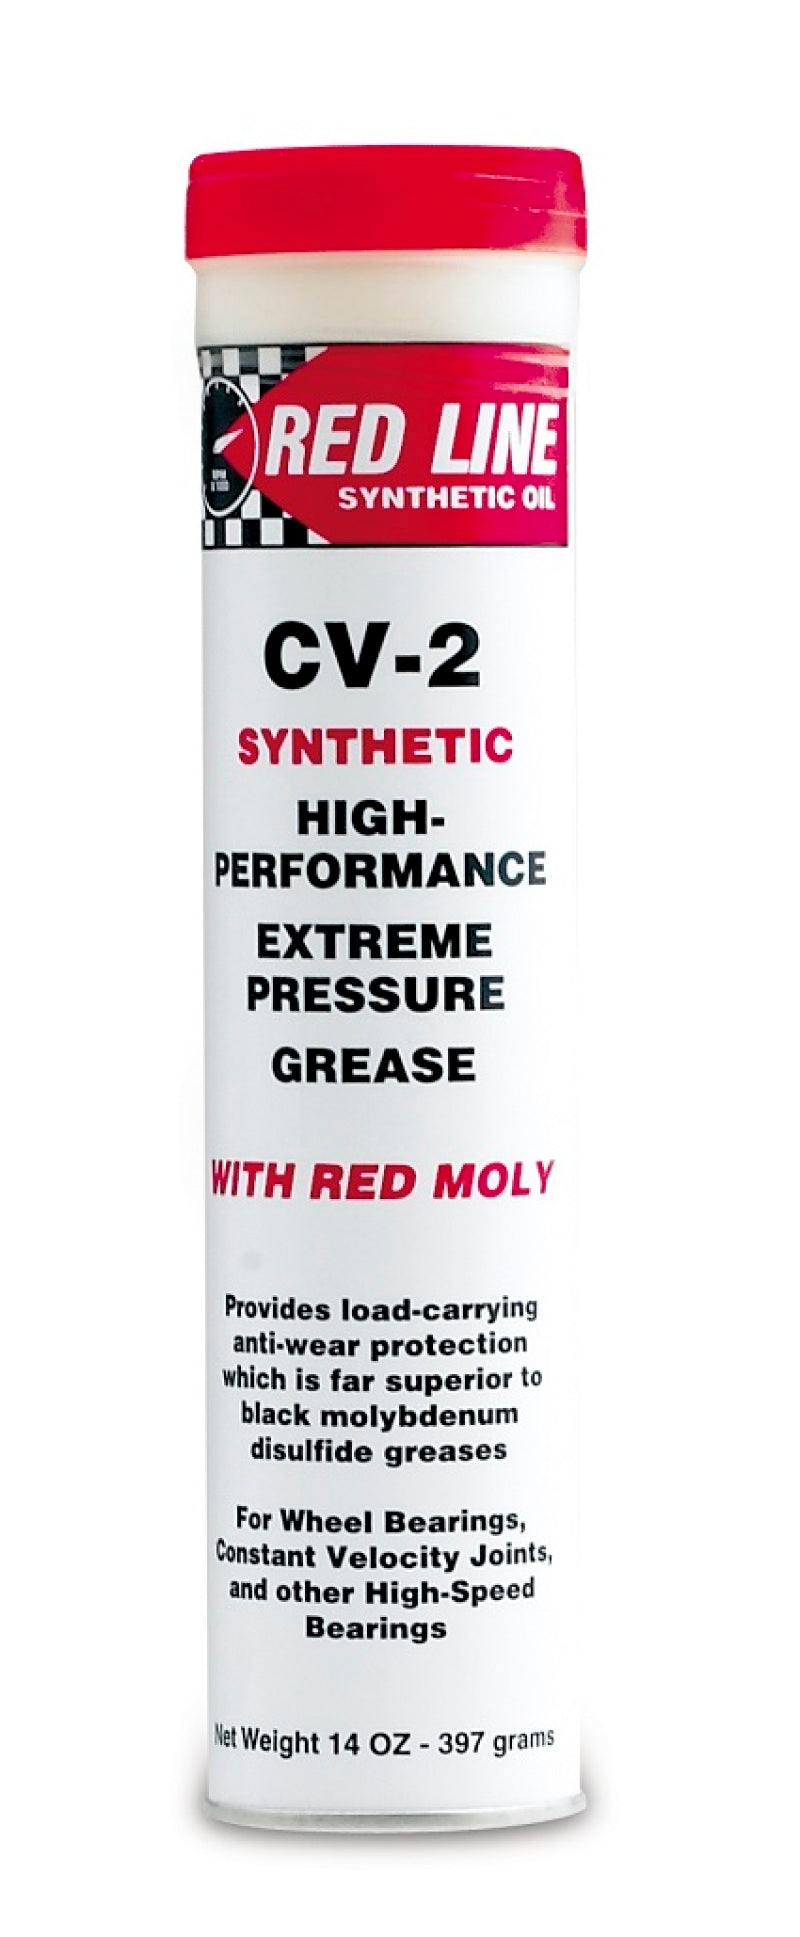 Red Line CV-2 Grease w/Moly - 14oz. Tube.